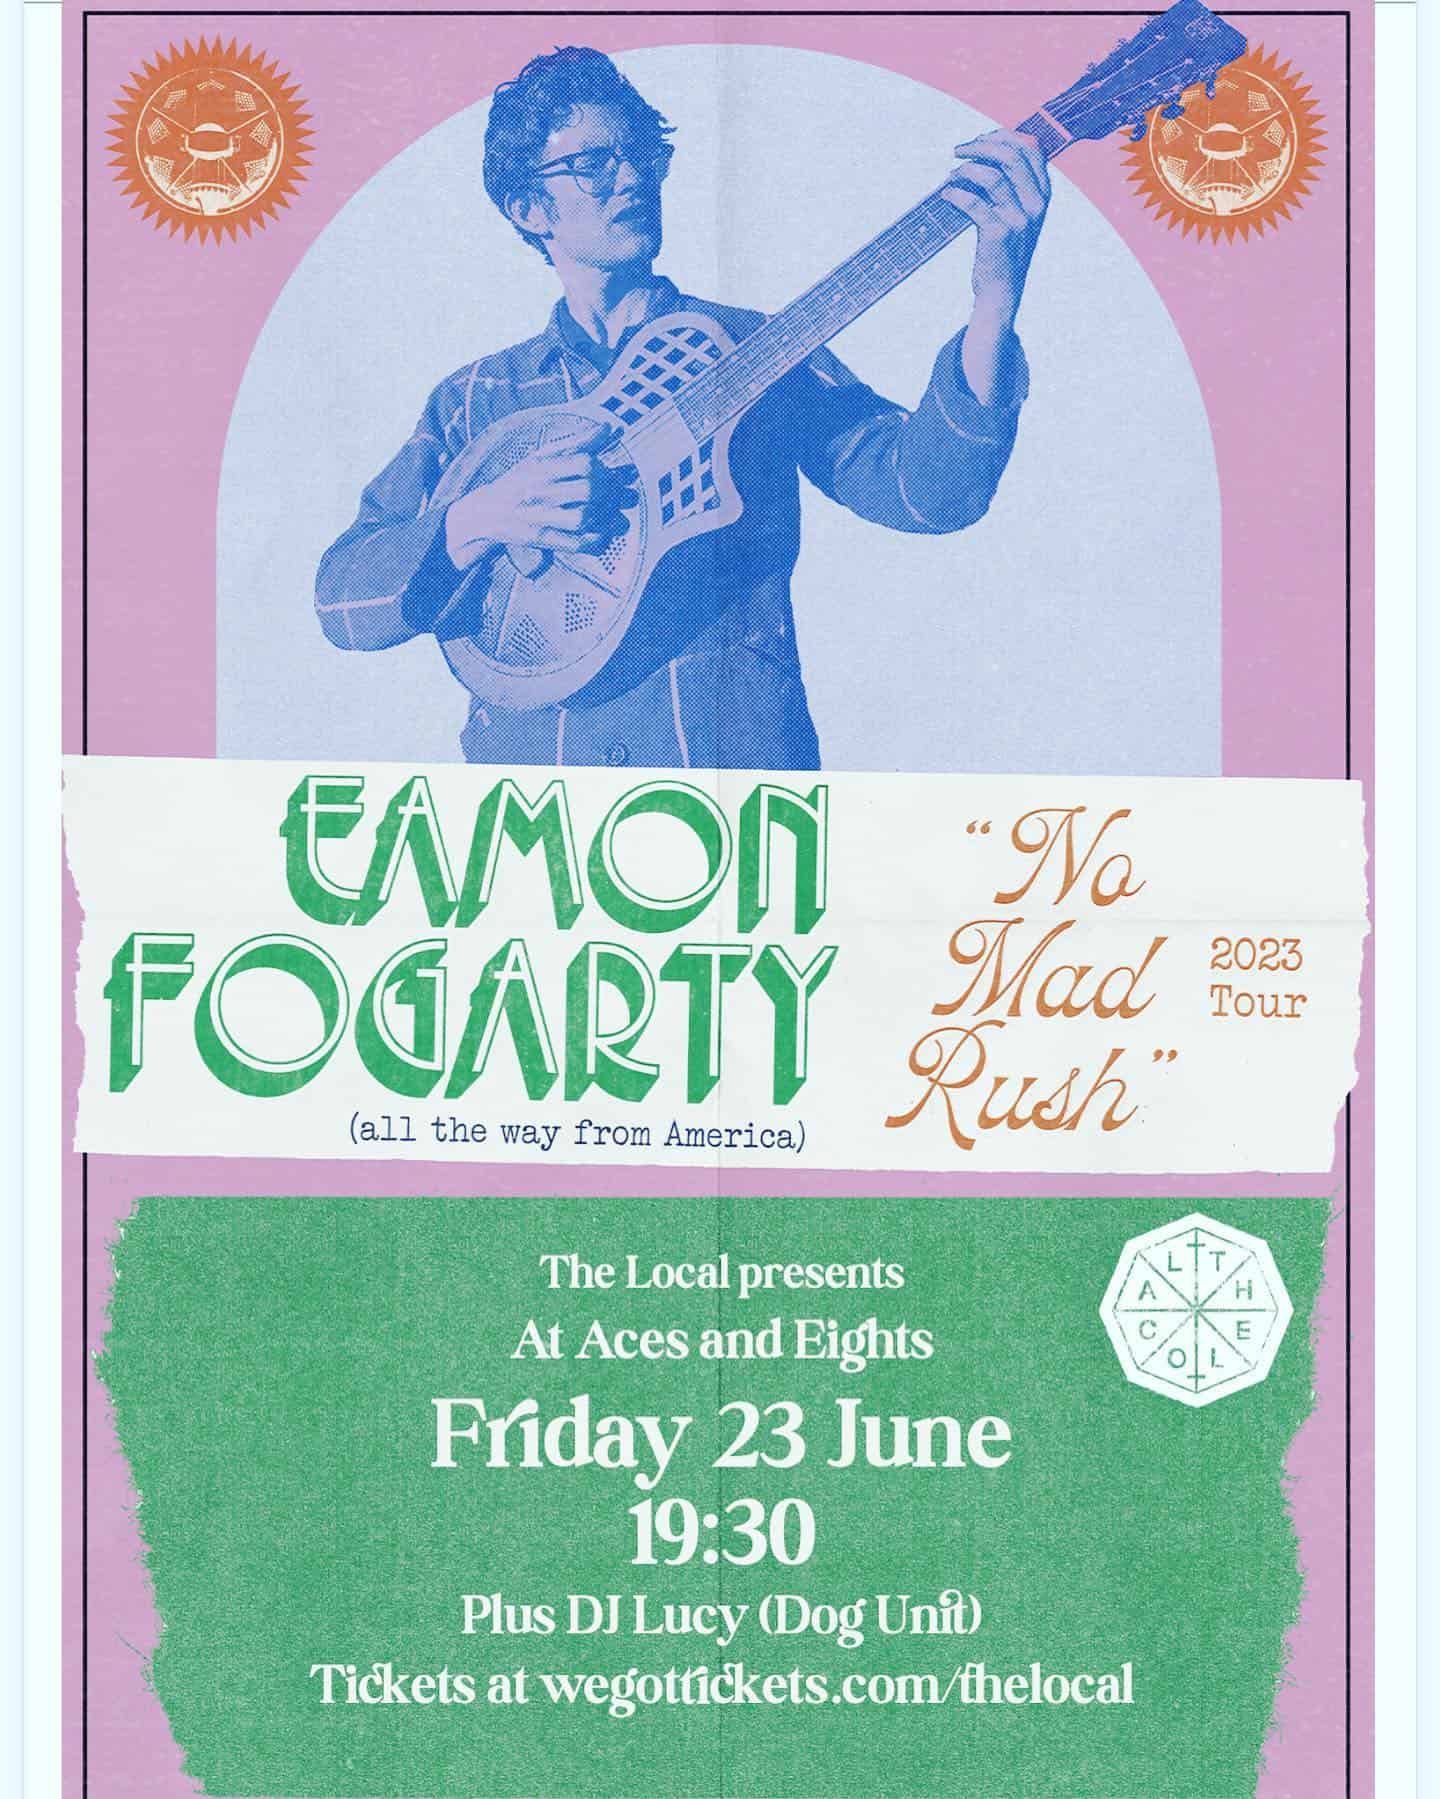 The Local Present Eamon Fogarty